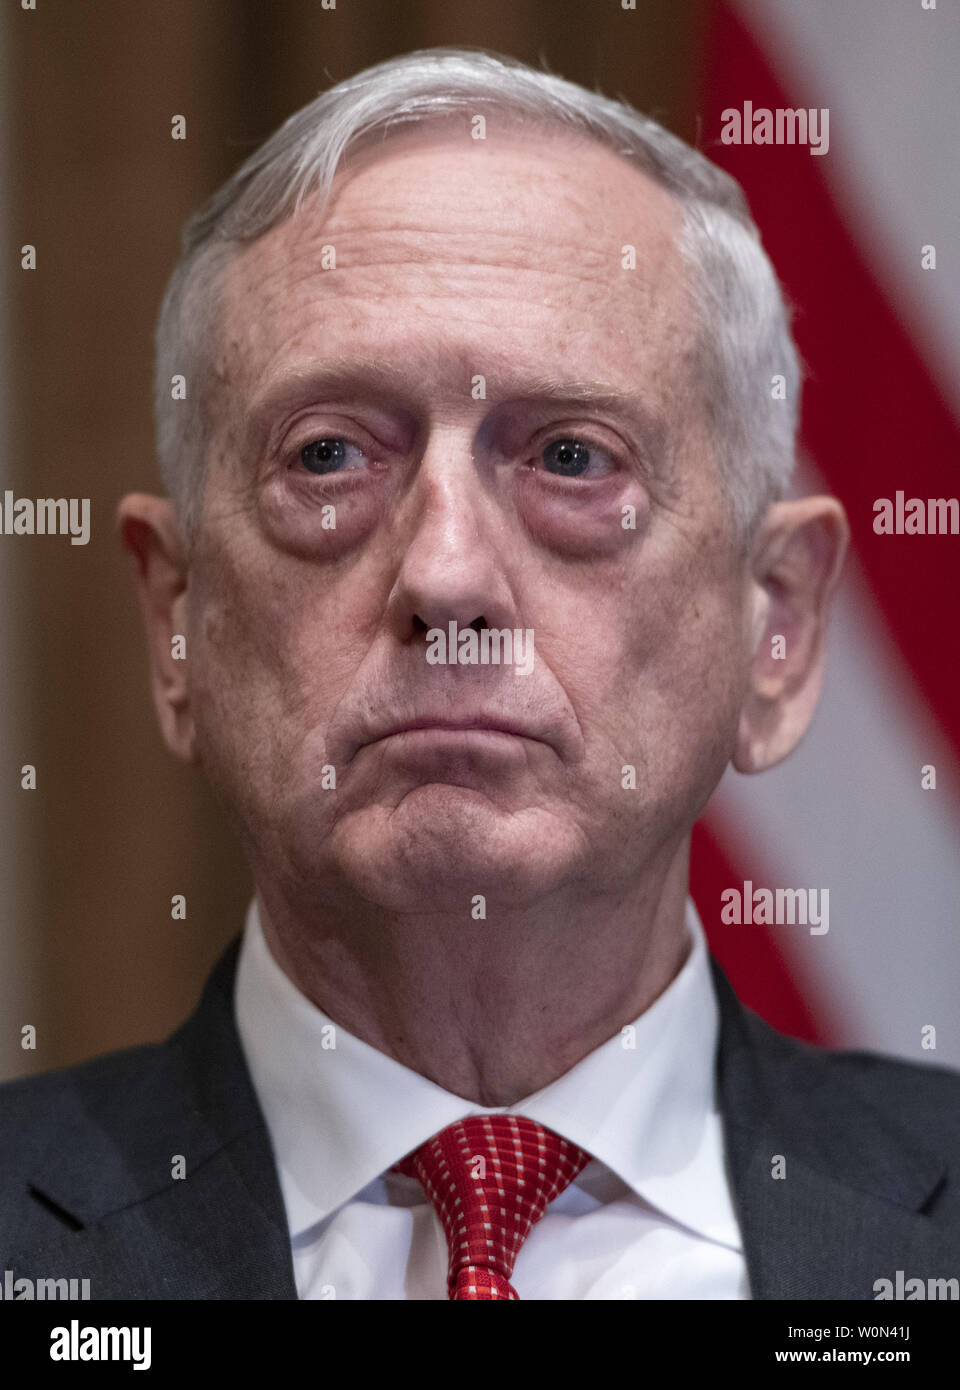 United States Secretary of Defense James Mattis listens as US President Donald J. Trump makes a statement to the media as he prepares to receive a briefing from senior military leaders in the Cabinet Room of the White House in Washington, DC on Tuesday, October 23, 2018.  The President took questions on the proposed space force, immigration, the caravan and Saudi actions in the killing of Jamal Khashoggi.       Photo by Ron Sachs/UPI Stock Photo